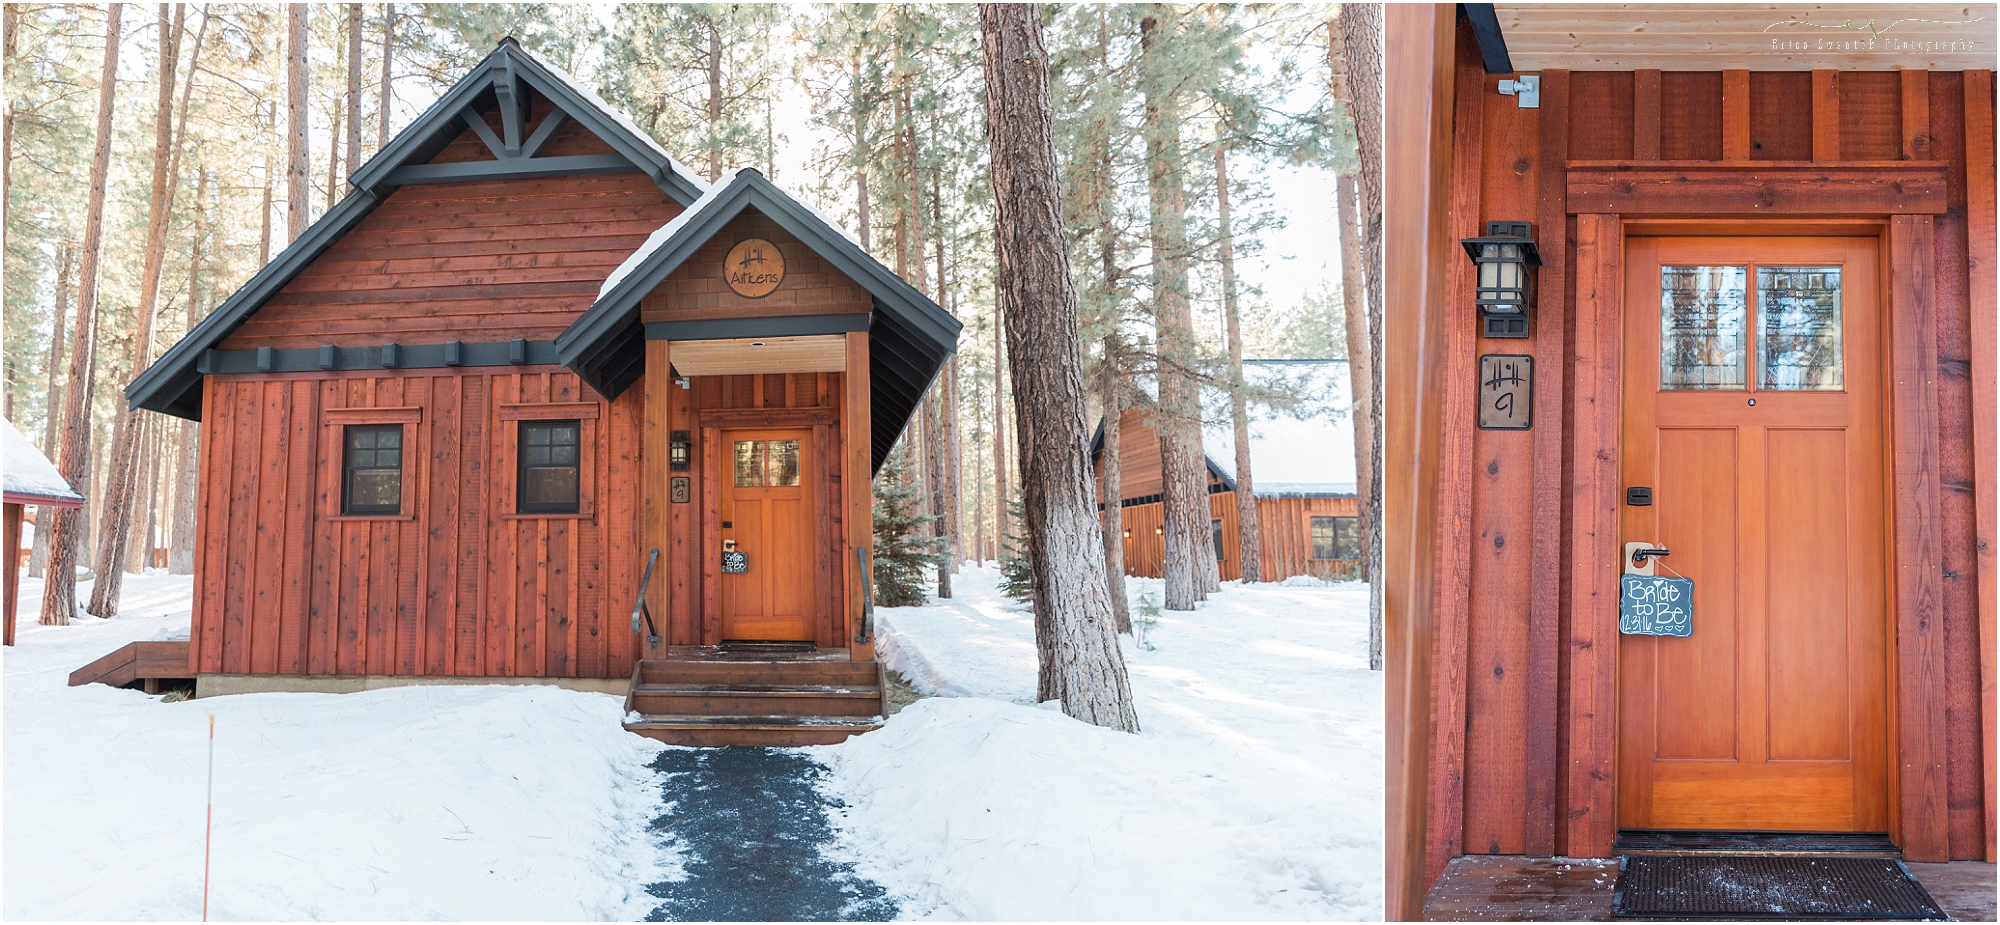 Gorgeous rustic cabins situated in the tall pines, blanketed with fresh snow, for this Sisters Oregon winter wedding at Five Pine Lodge. 